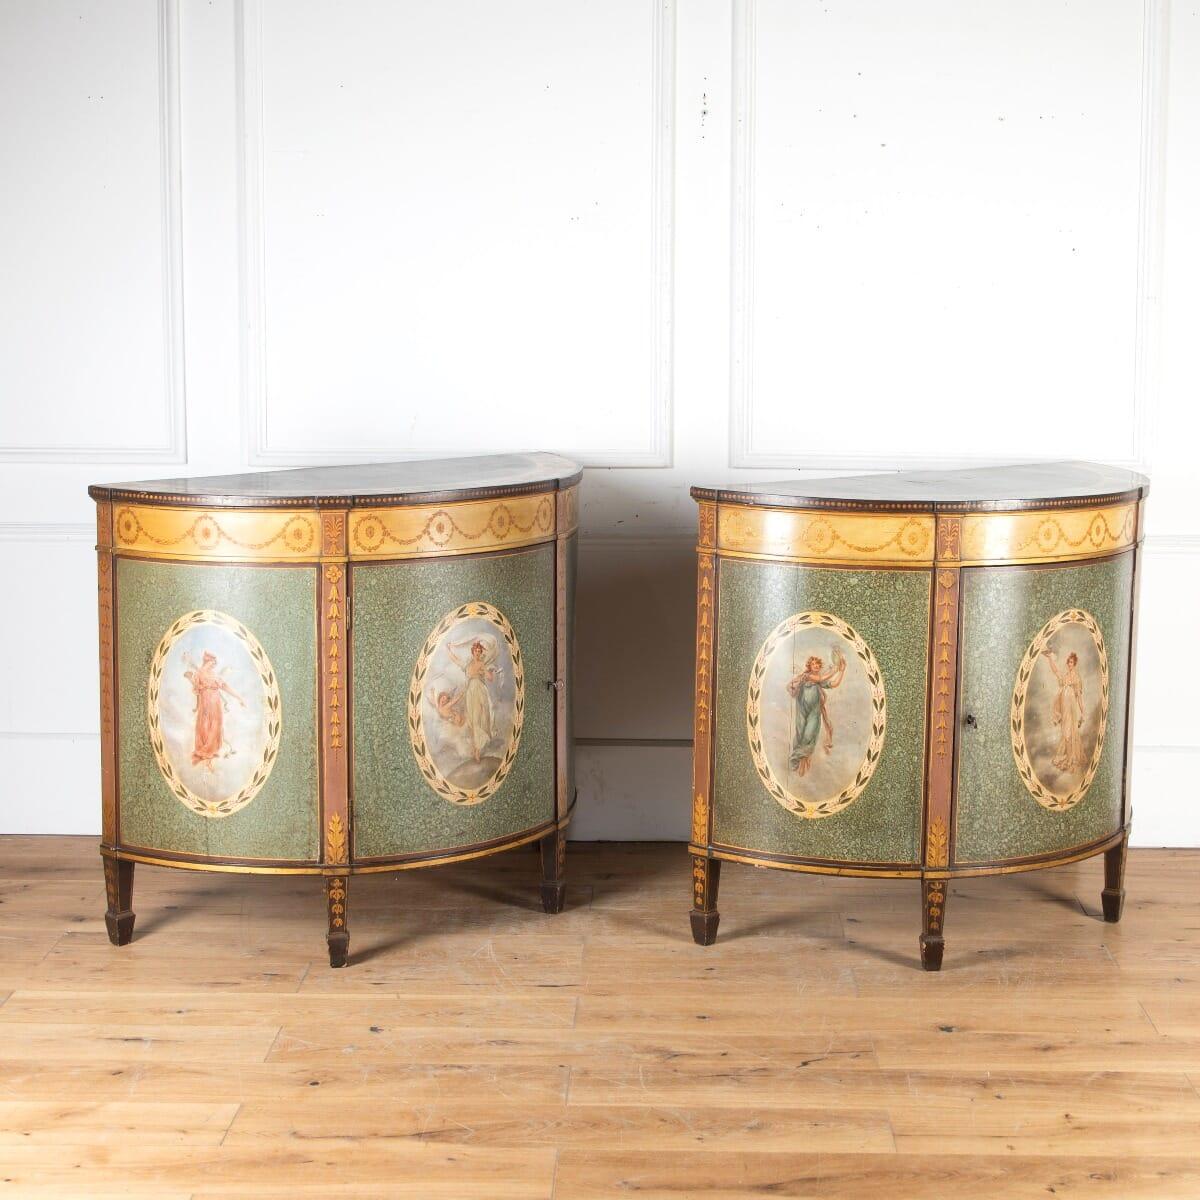 Exceptional pair of 19th century superior quality demilune side cabinets. This beautiful pair are firmly attributed to Wright & Mansfield of Bond Street, London.

The tops feature simulated inlaid fanned quadrants to the centre and wide borders of